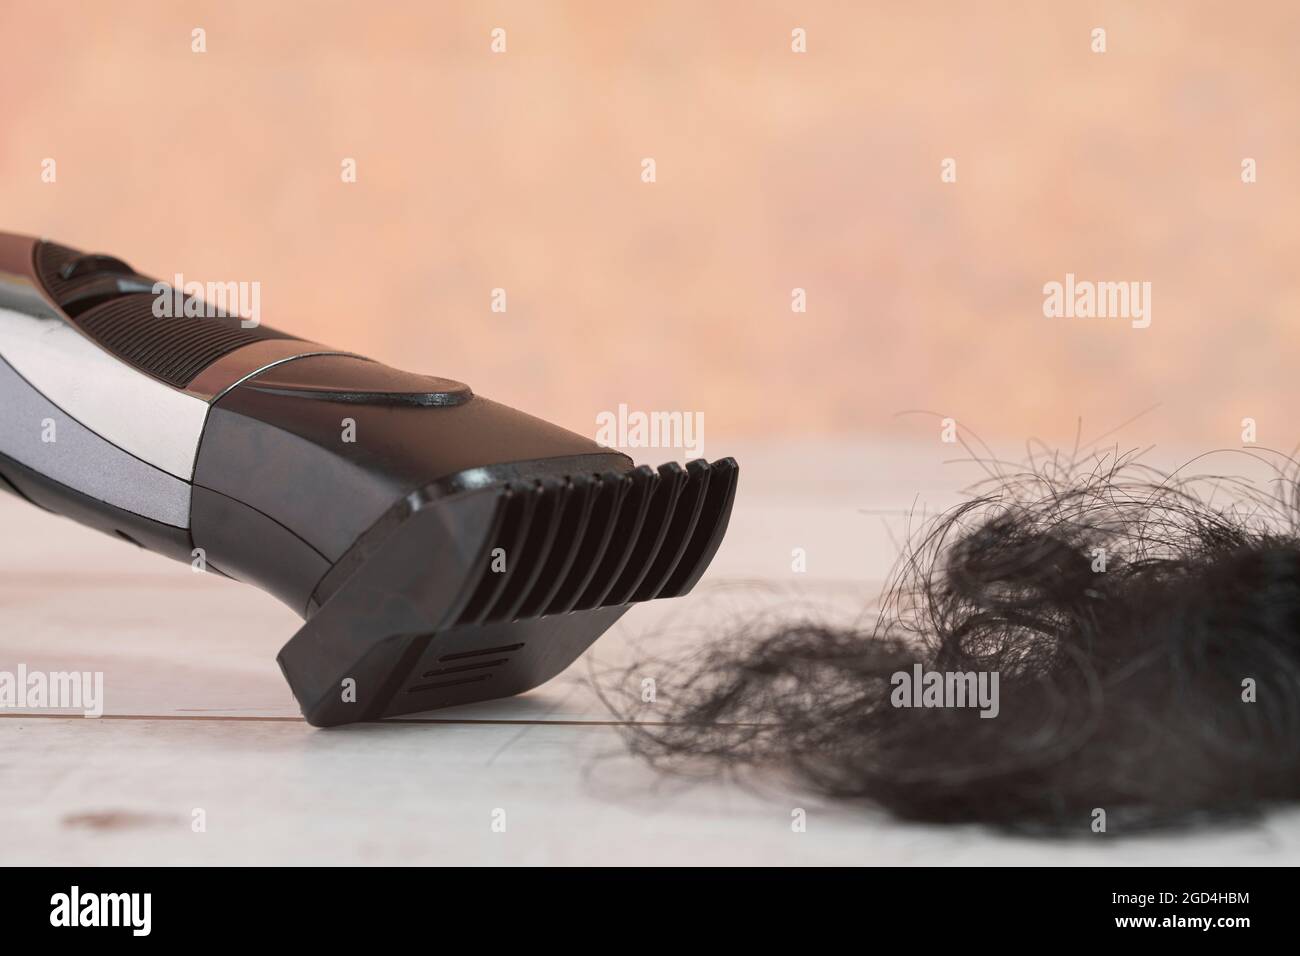 Cordless hair trimmer. During the pandemic when barbershops are closed, more men bought the devise to cut their own hair. Selective focus points. Blur Stock Photo